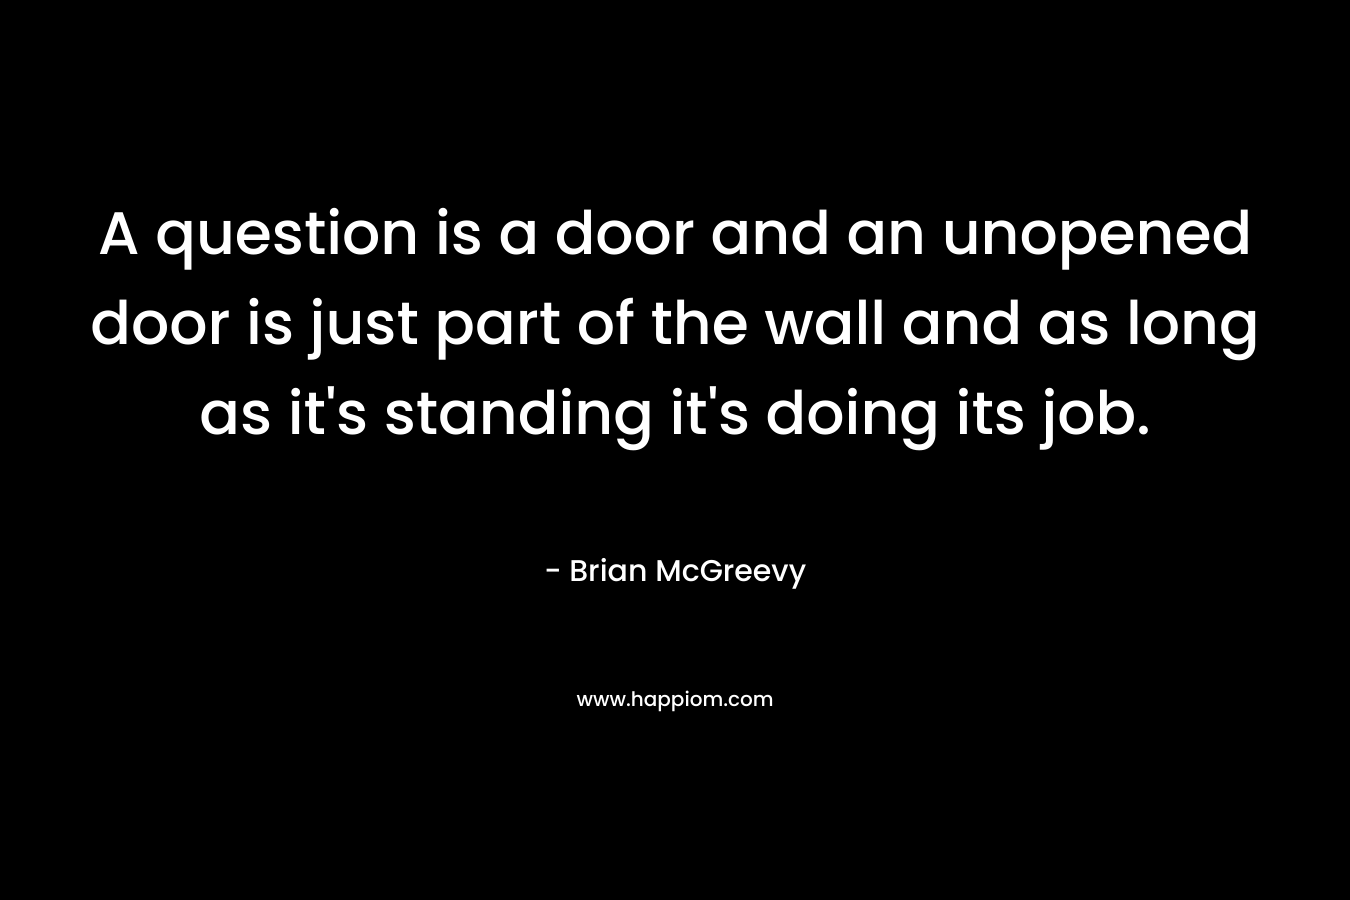 A question is a door and an unopened door is just part of the wall and as long as it’s standing it’s doing its job. – Brian McGreevy